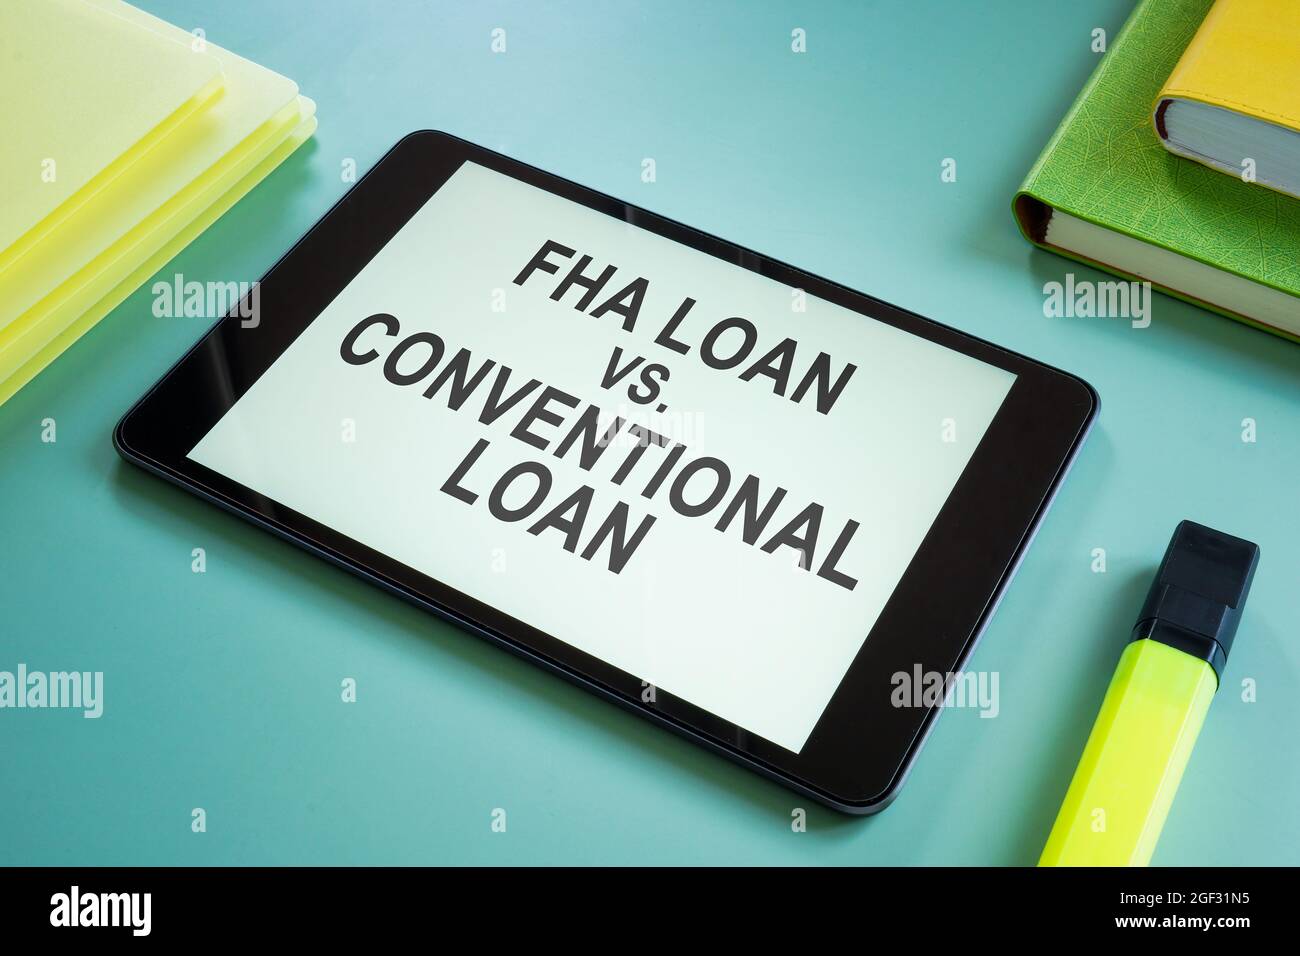 FHA loan vs Conventional loan choice for mortgage on the screen. Stock Photo